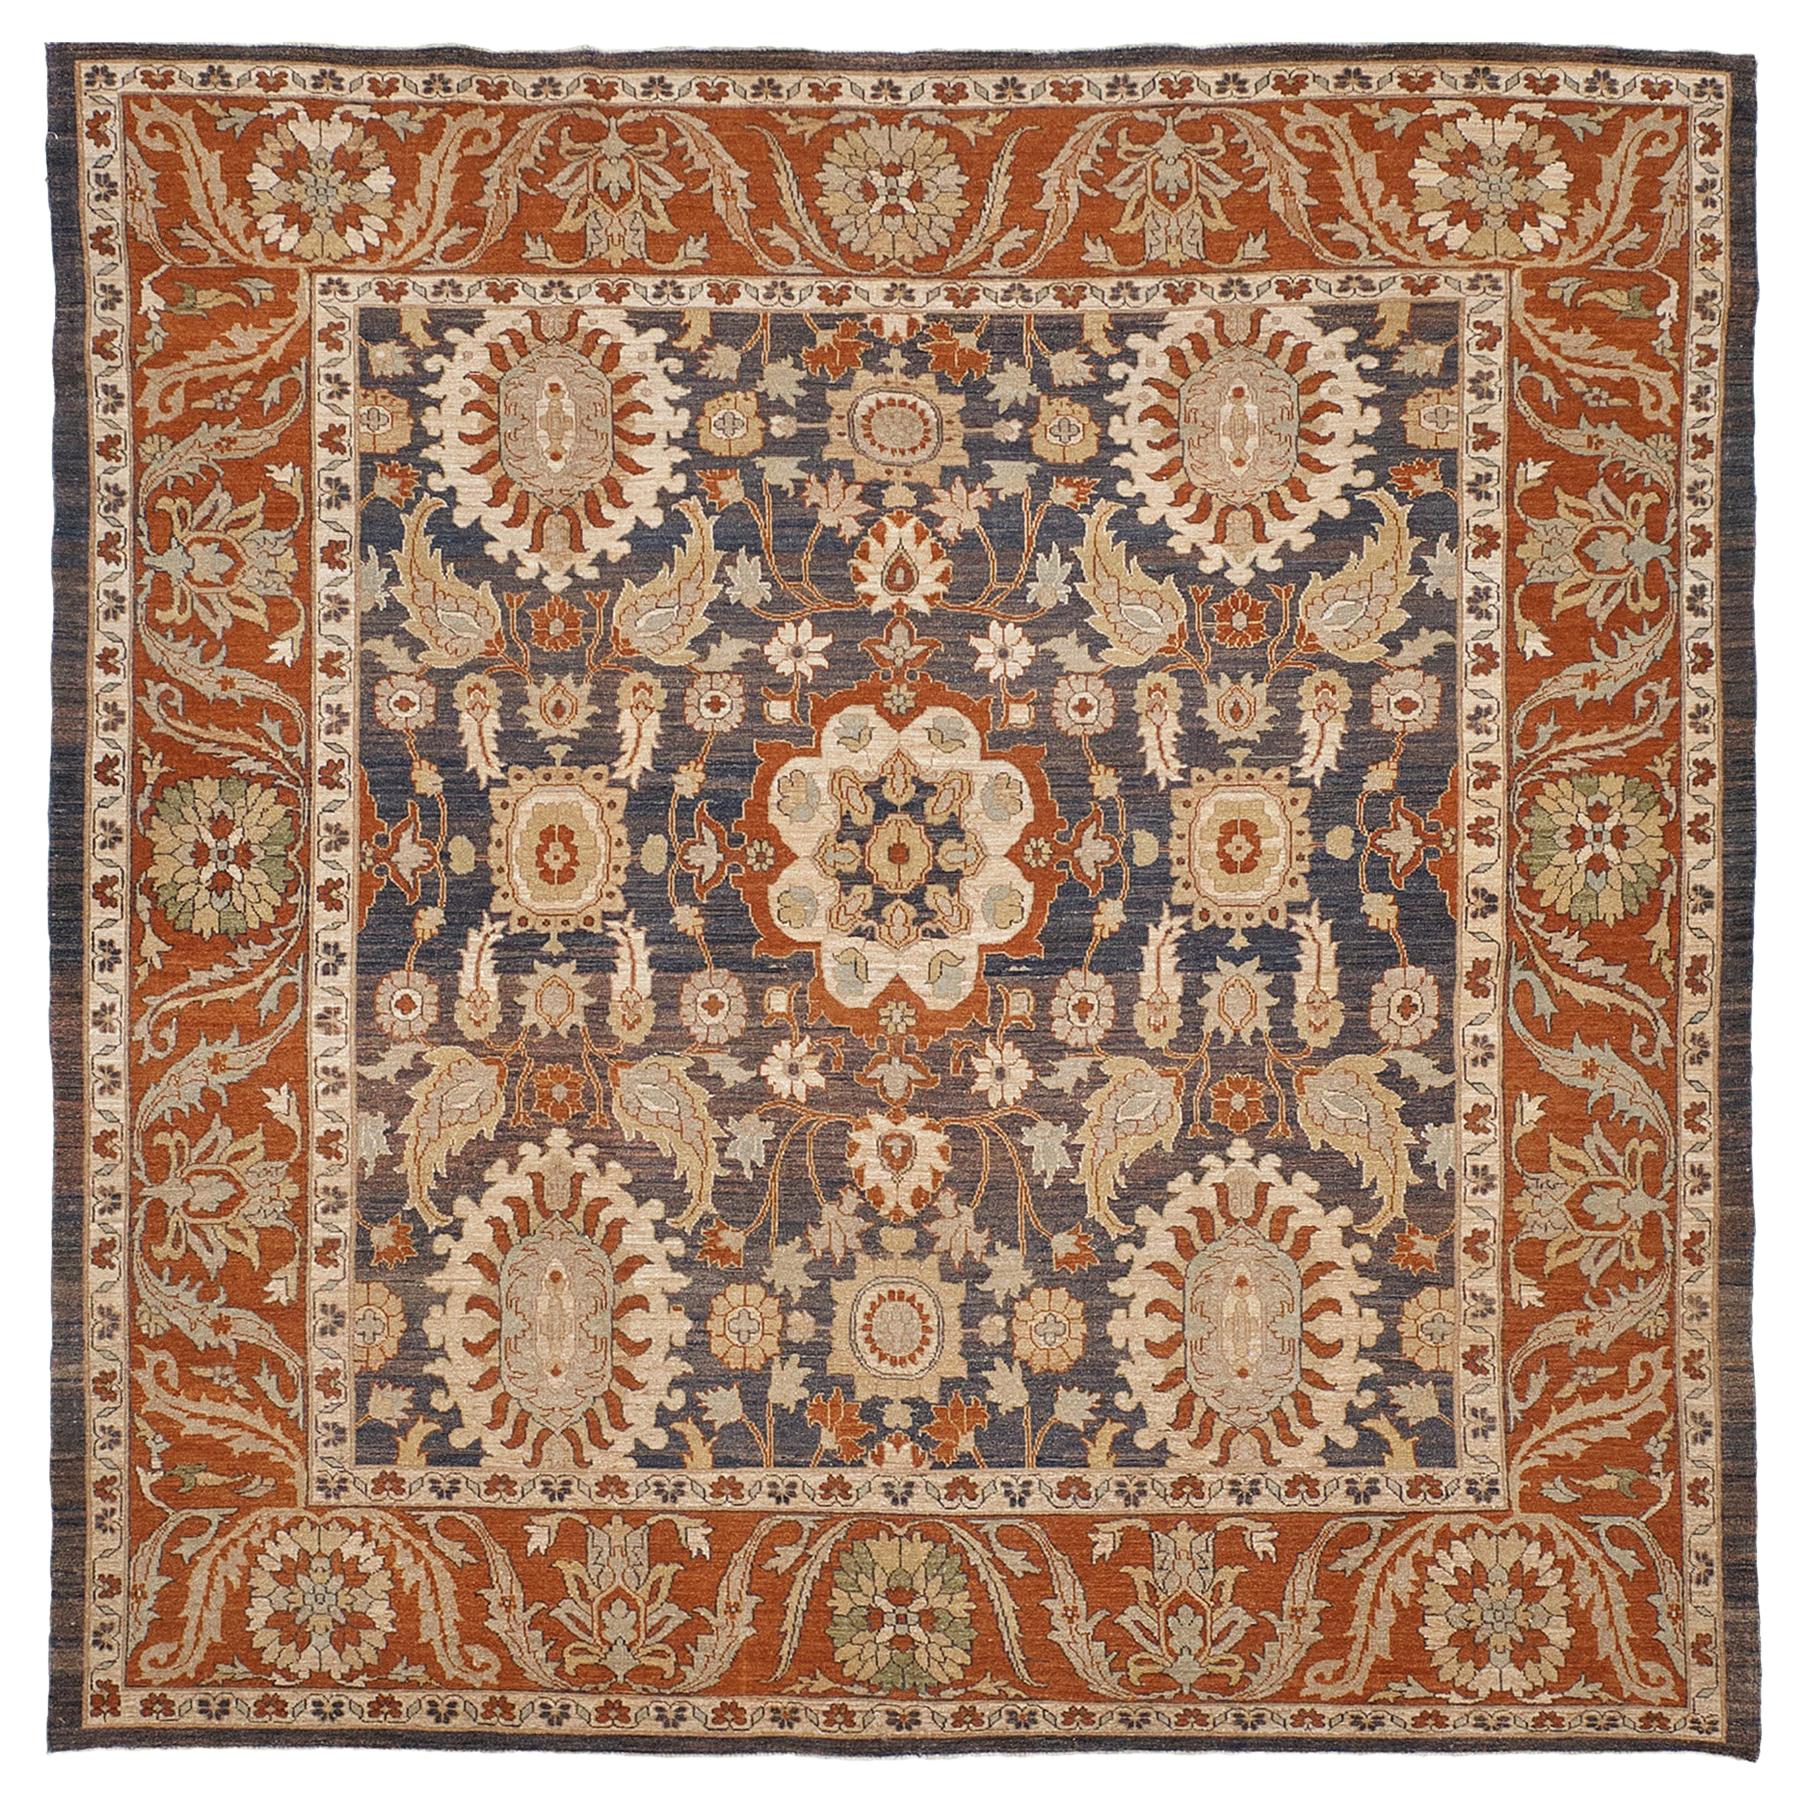 Natural Dye Antique Sultanabad Revival Rug from Mehraban